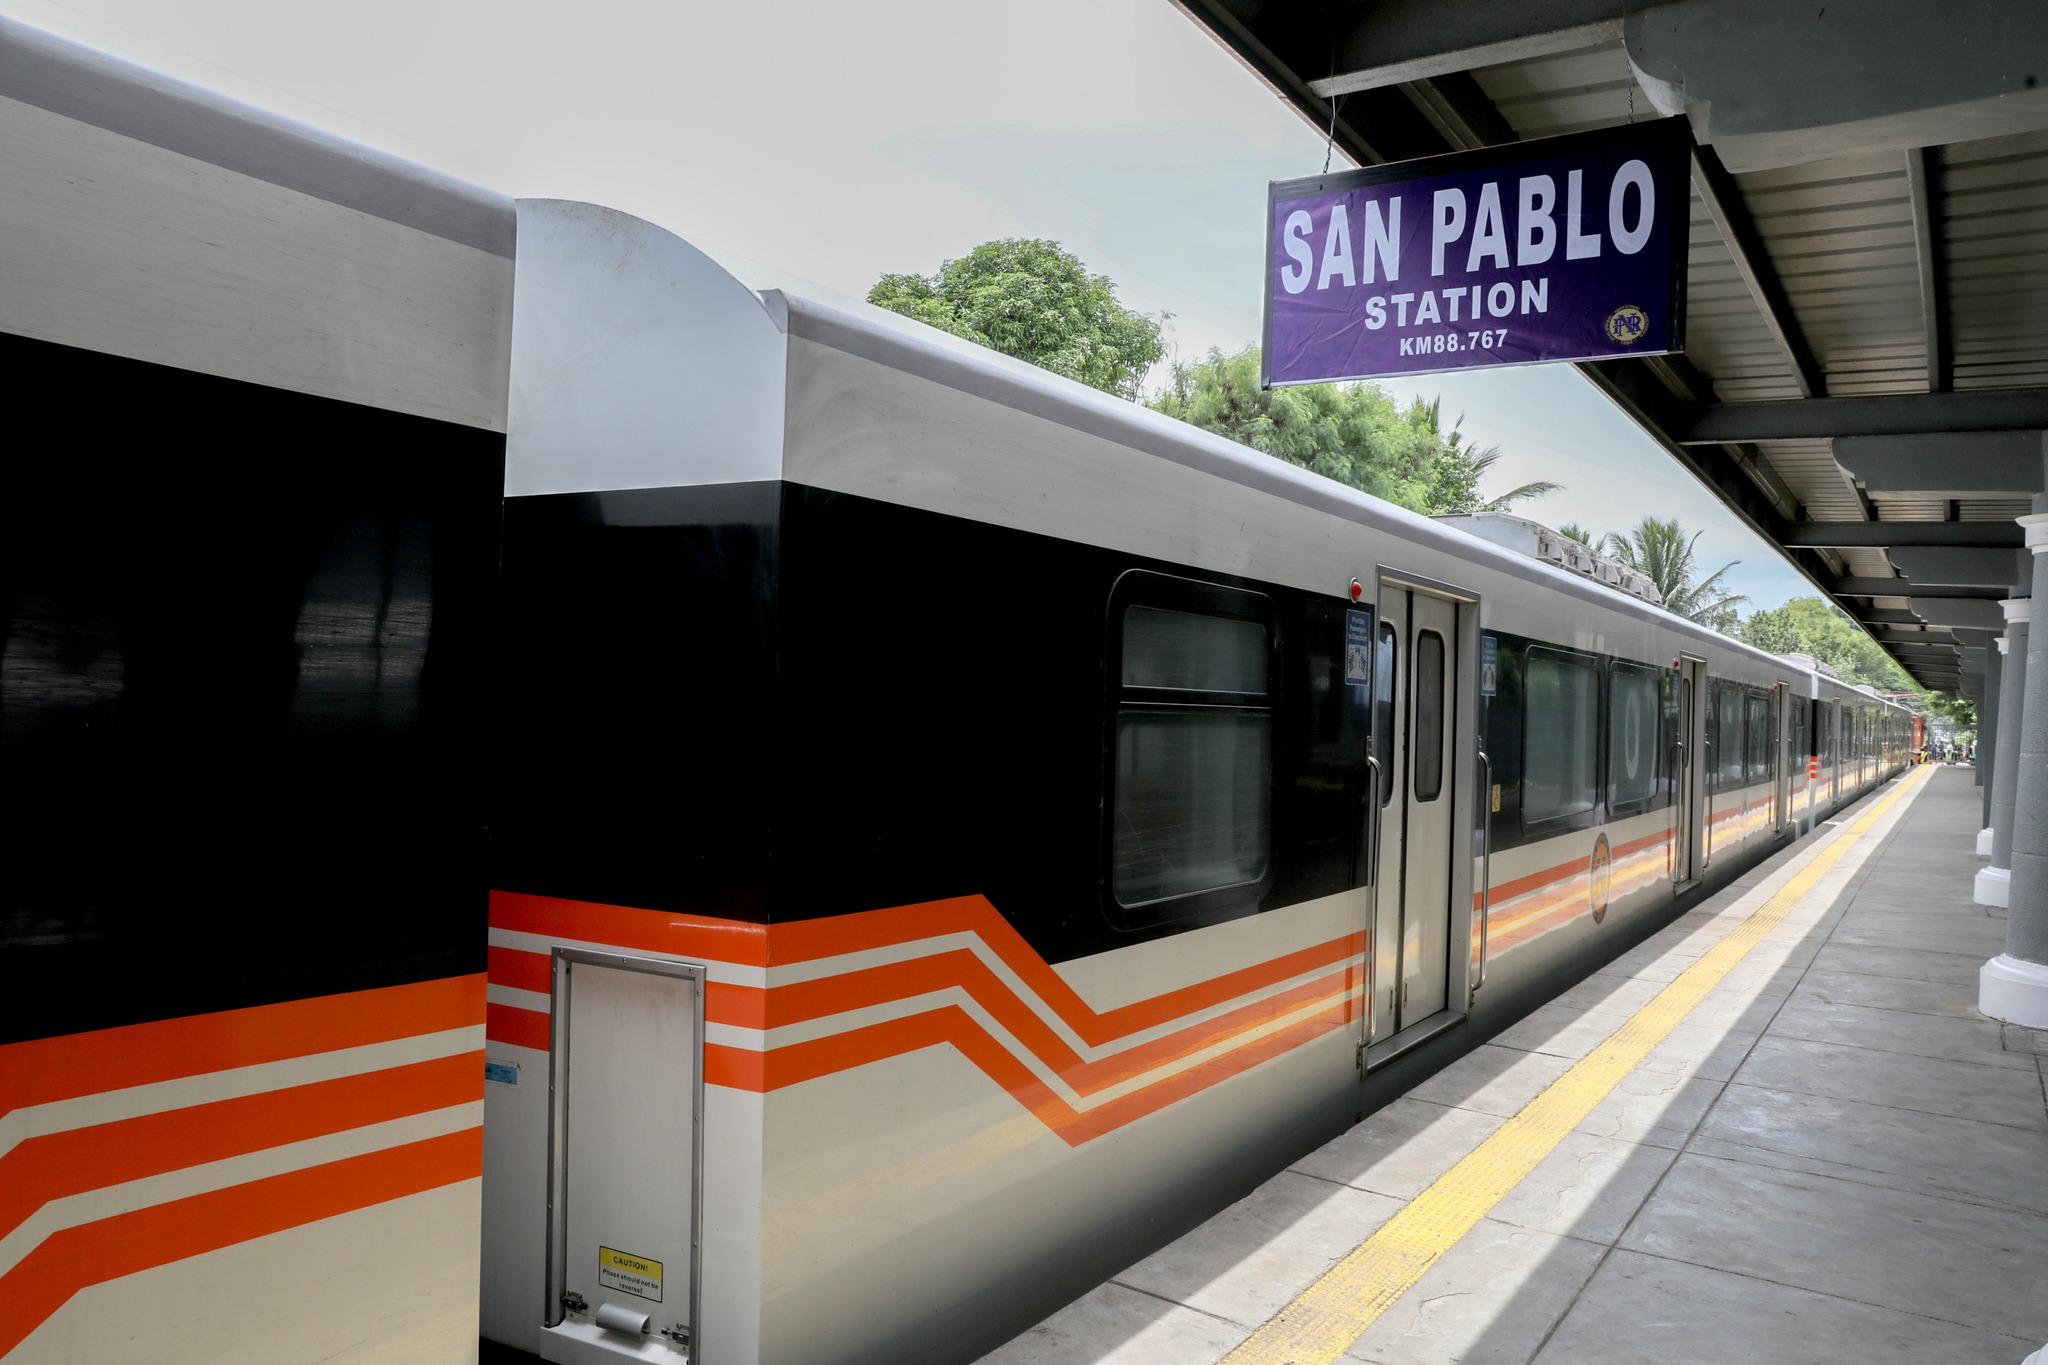 The San Pablo-Lucena PNR line is now open, travel time is 30 minutes